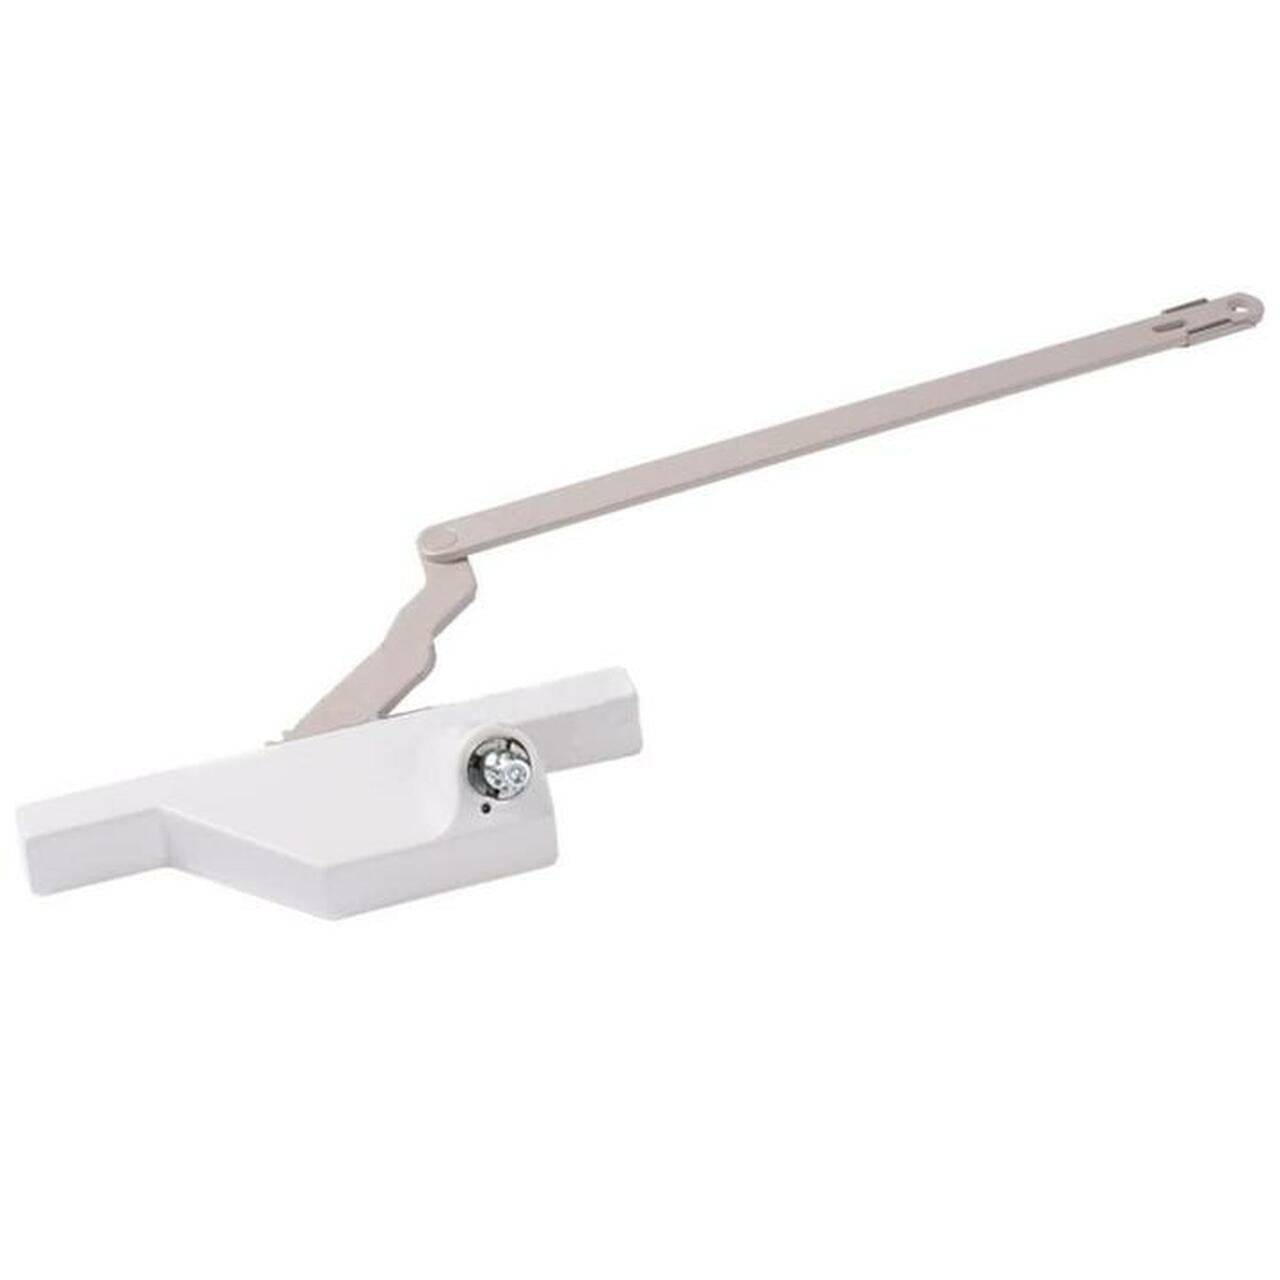 Truth Hardware Dyad Casement Window Operator with 9-1/4" Link Arm